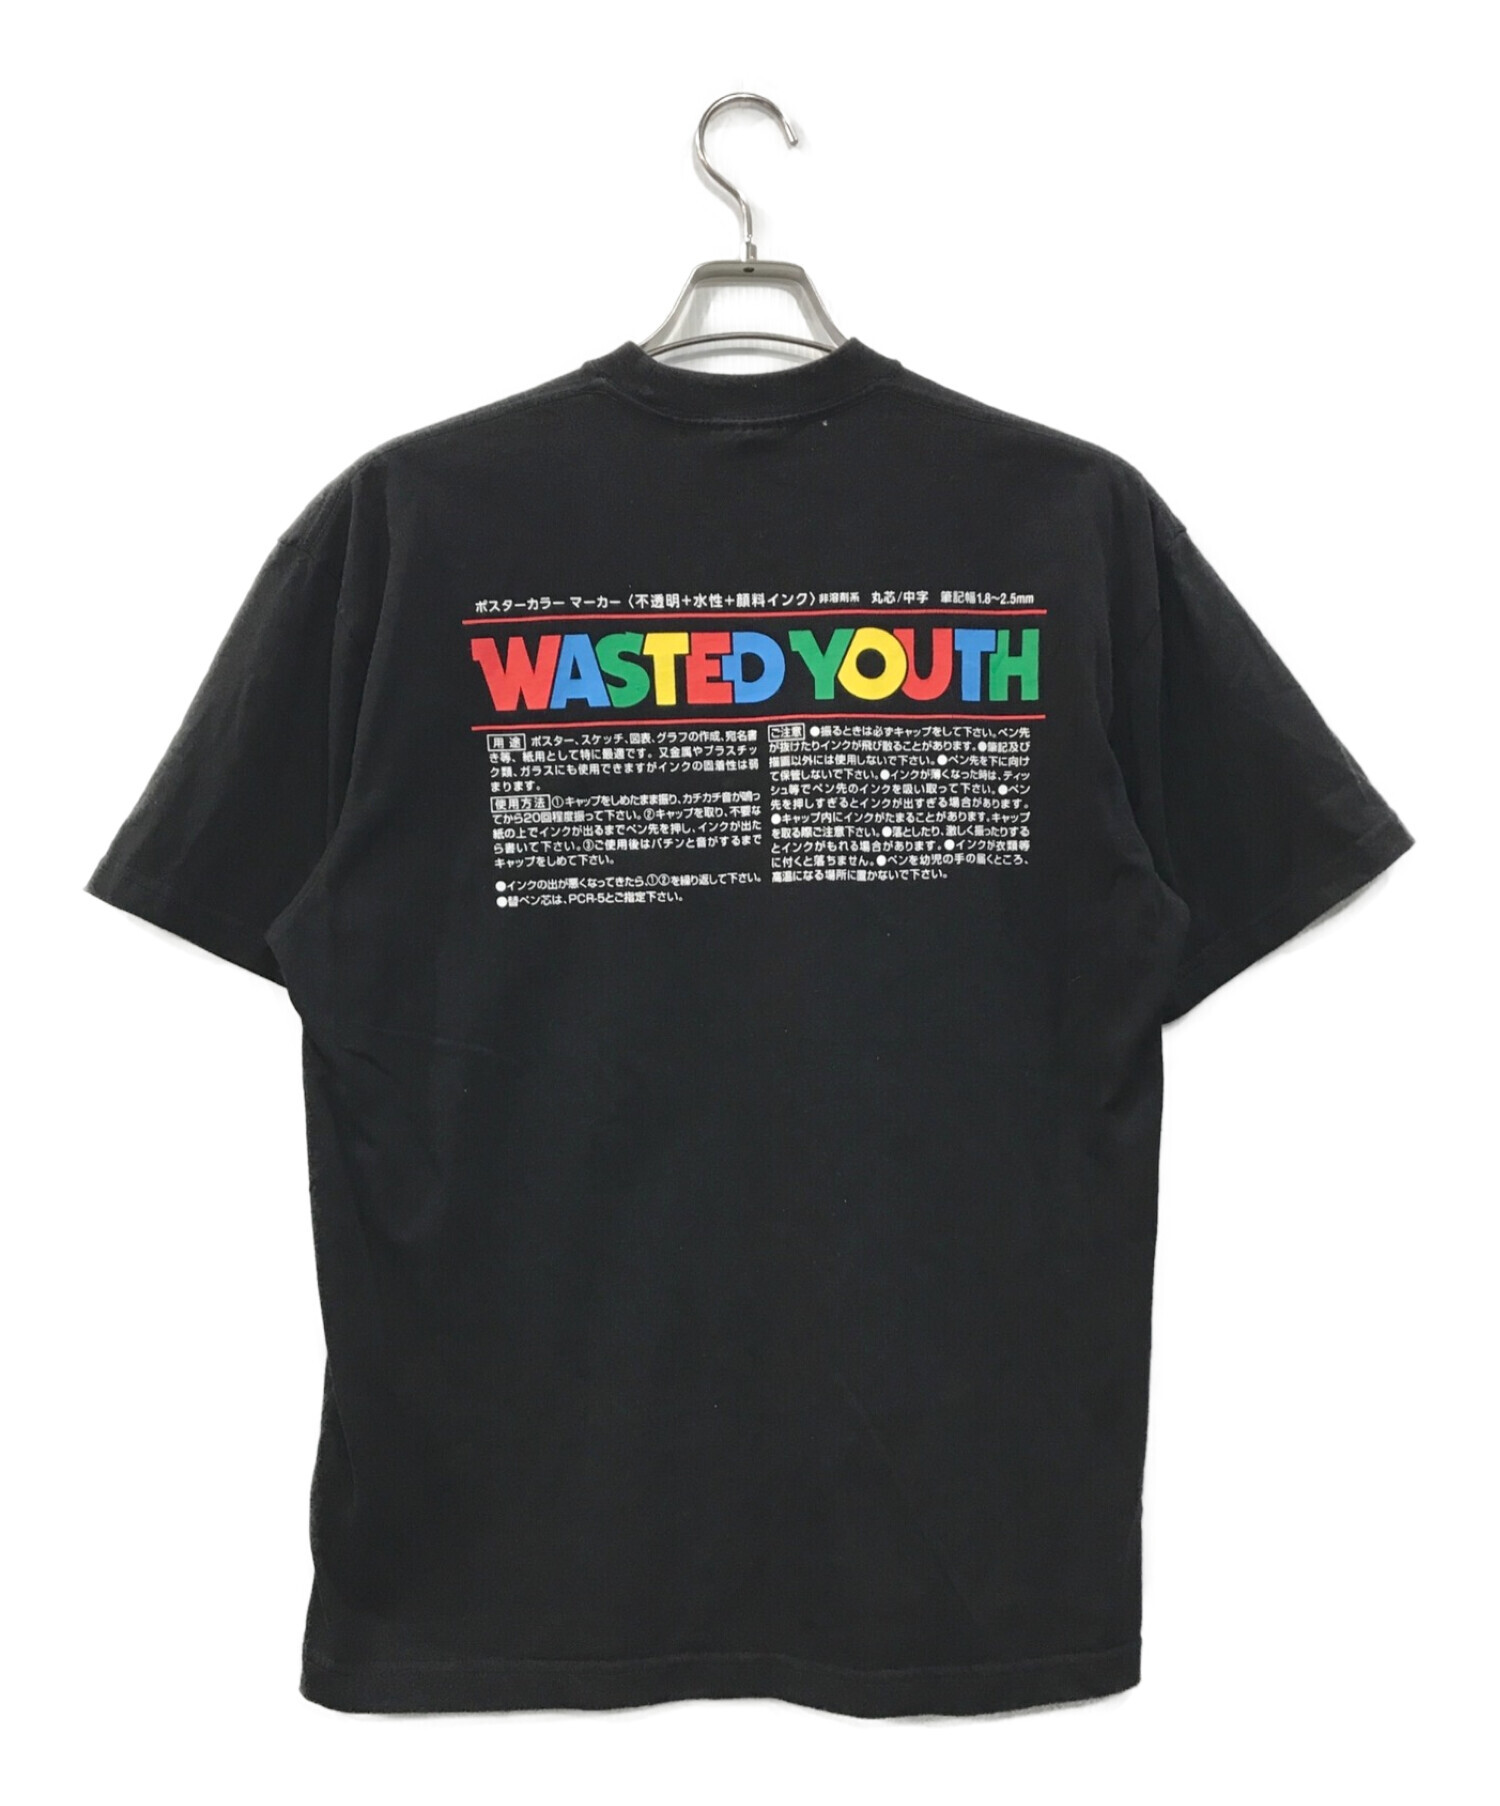 Wasted Youth T-Shirt XLサイズ pop up 限定 - Tシャツ/カットソー ...